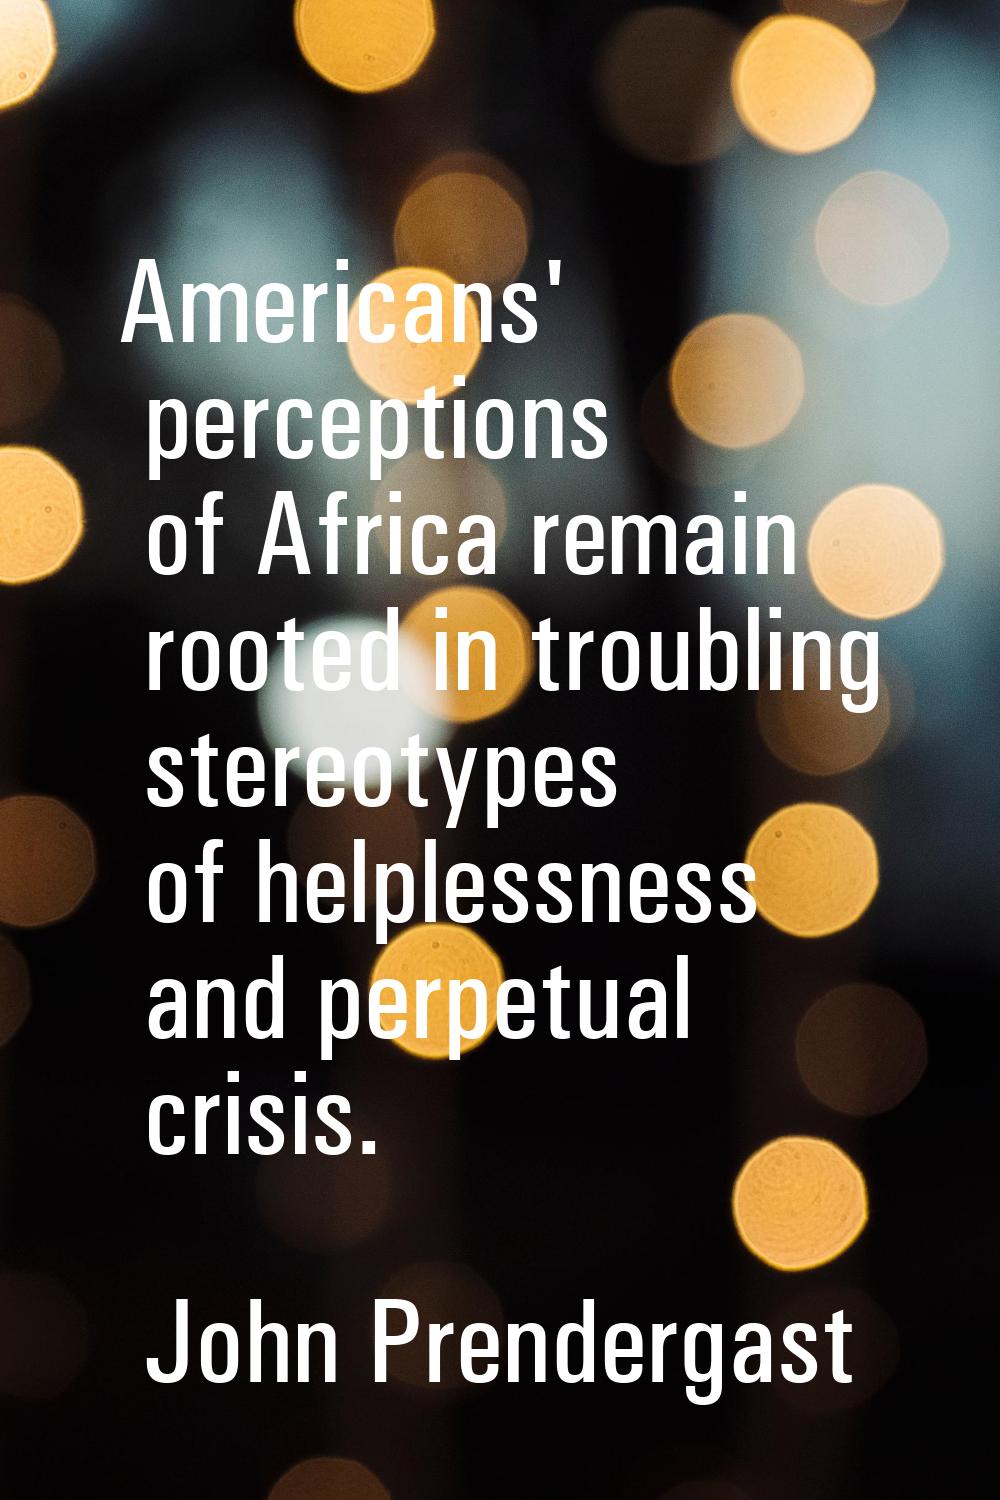 Americans' perceptions of Africa remain rooted in troubling stereotypes of helplessness and perpetu